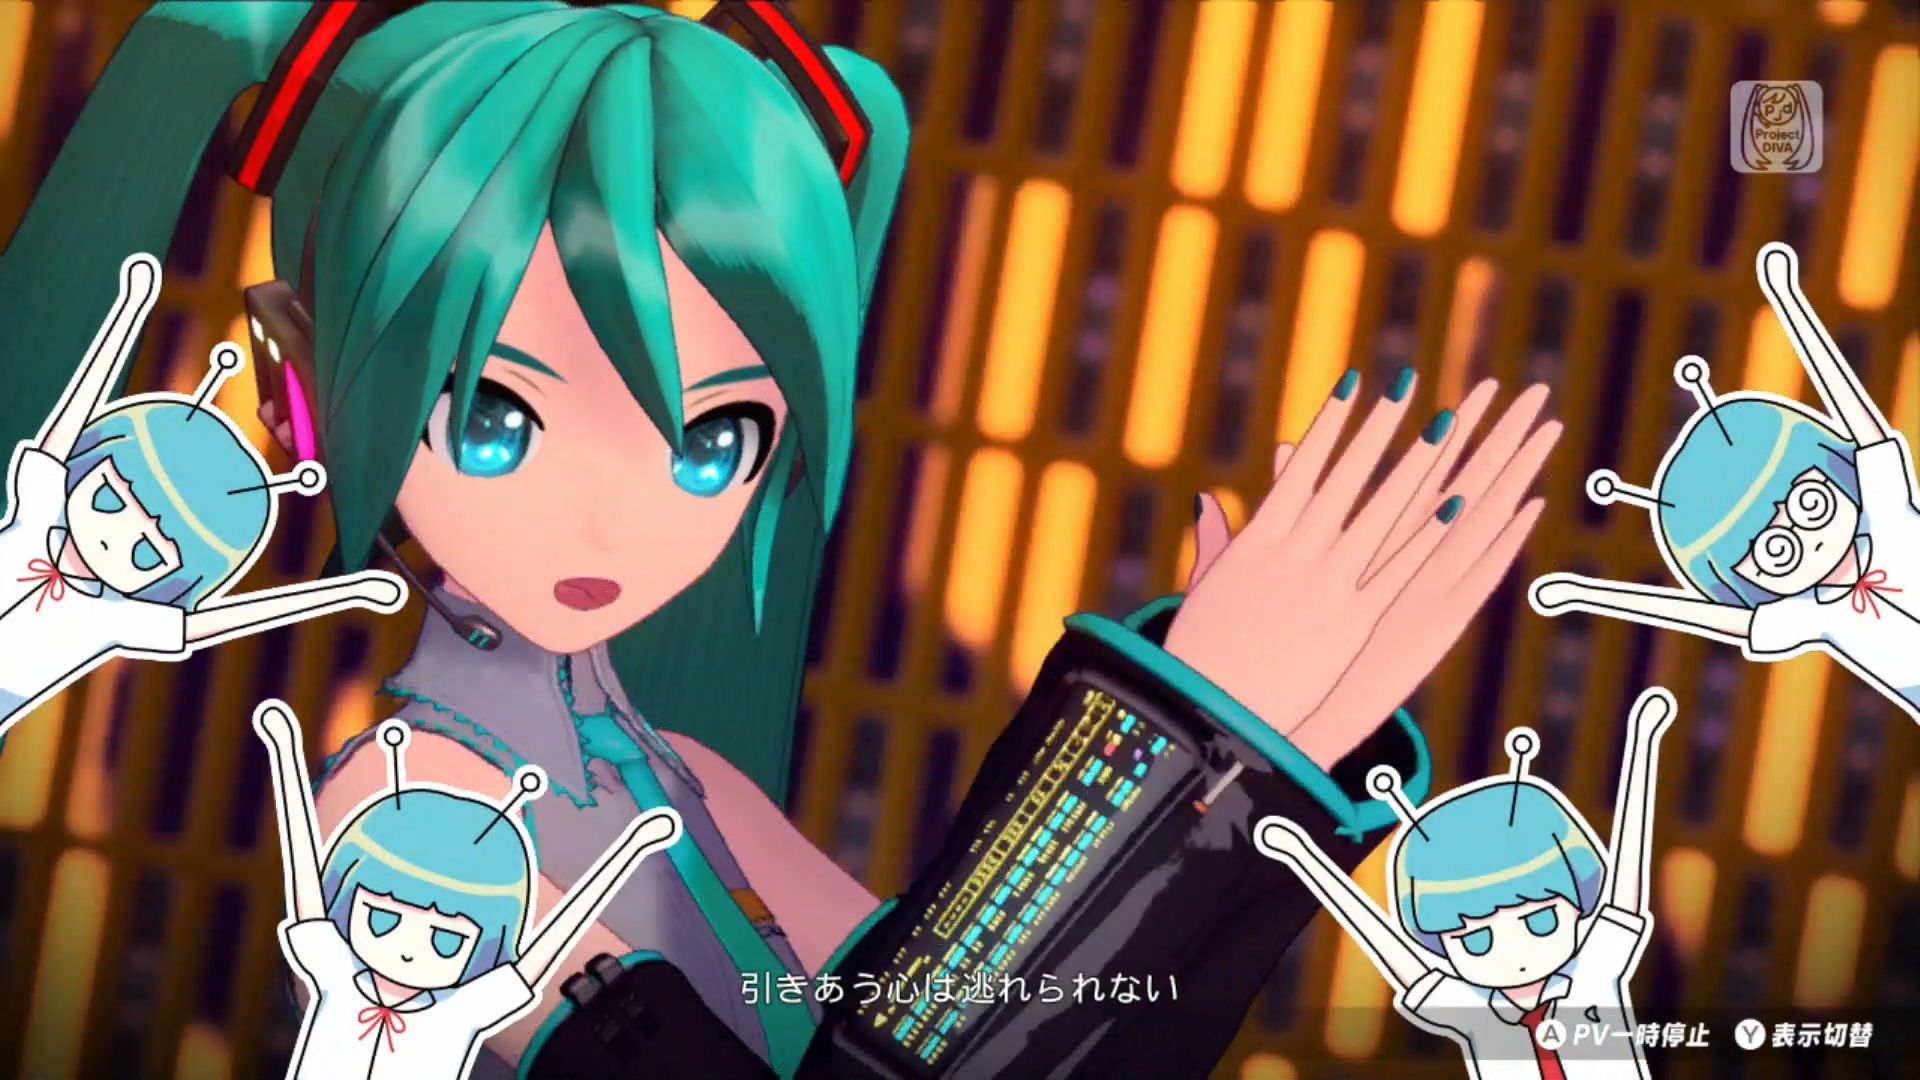 Take the stage with the Hatsune Miku: Project DIVA Mega Mix launch